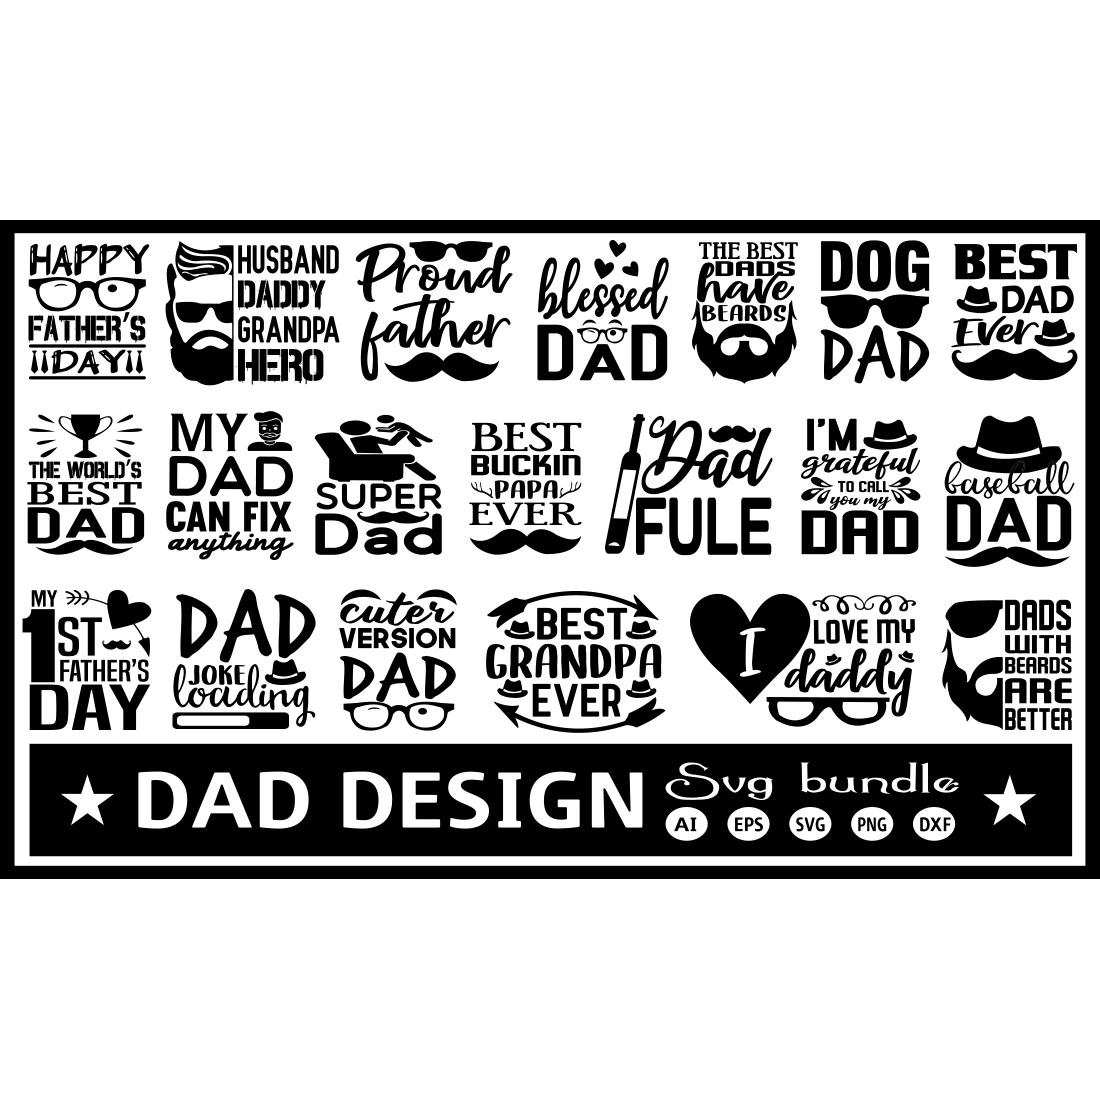 A selection of irresistible images for dad-themed prints